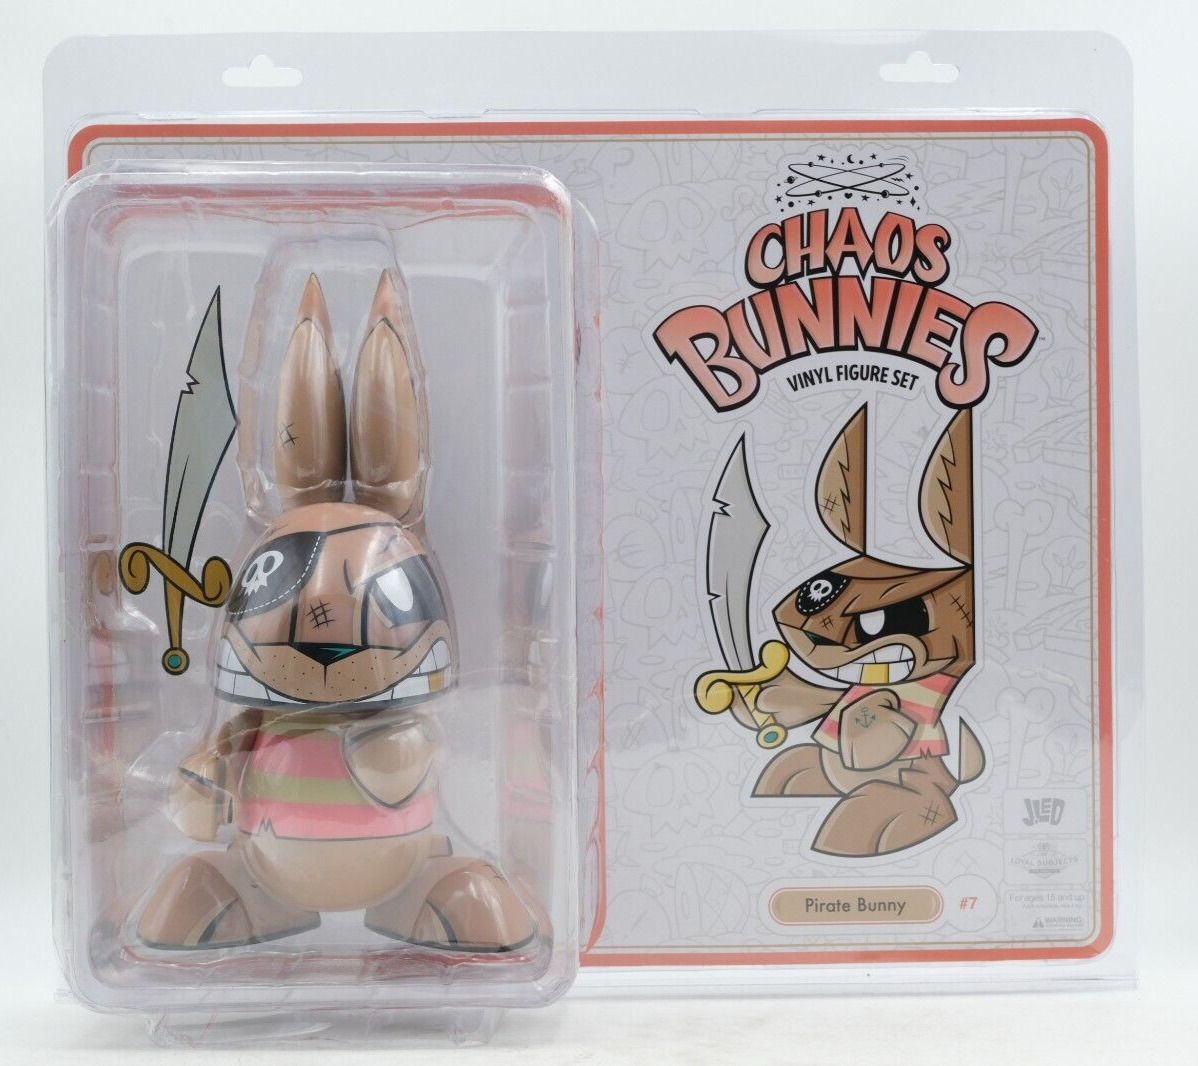 Joe Ledbetter Pirate Bunny Chaos Bunnies #7 Limited Edition of 700